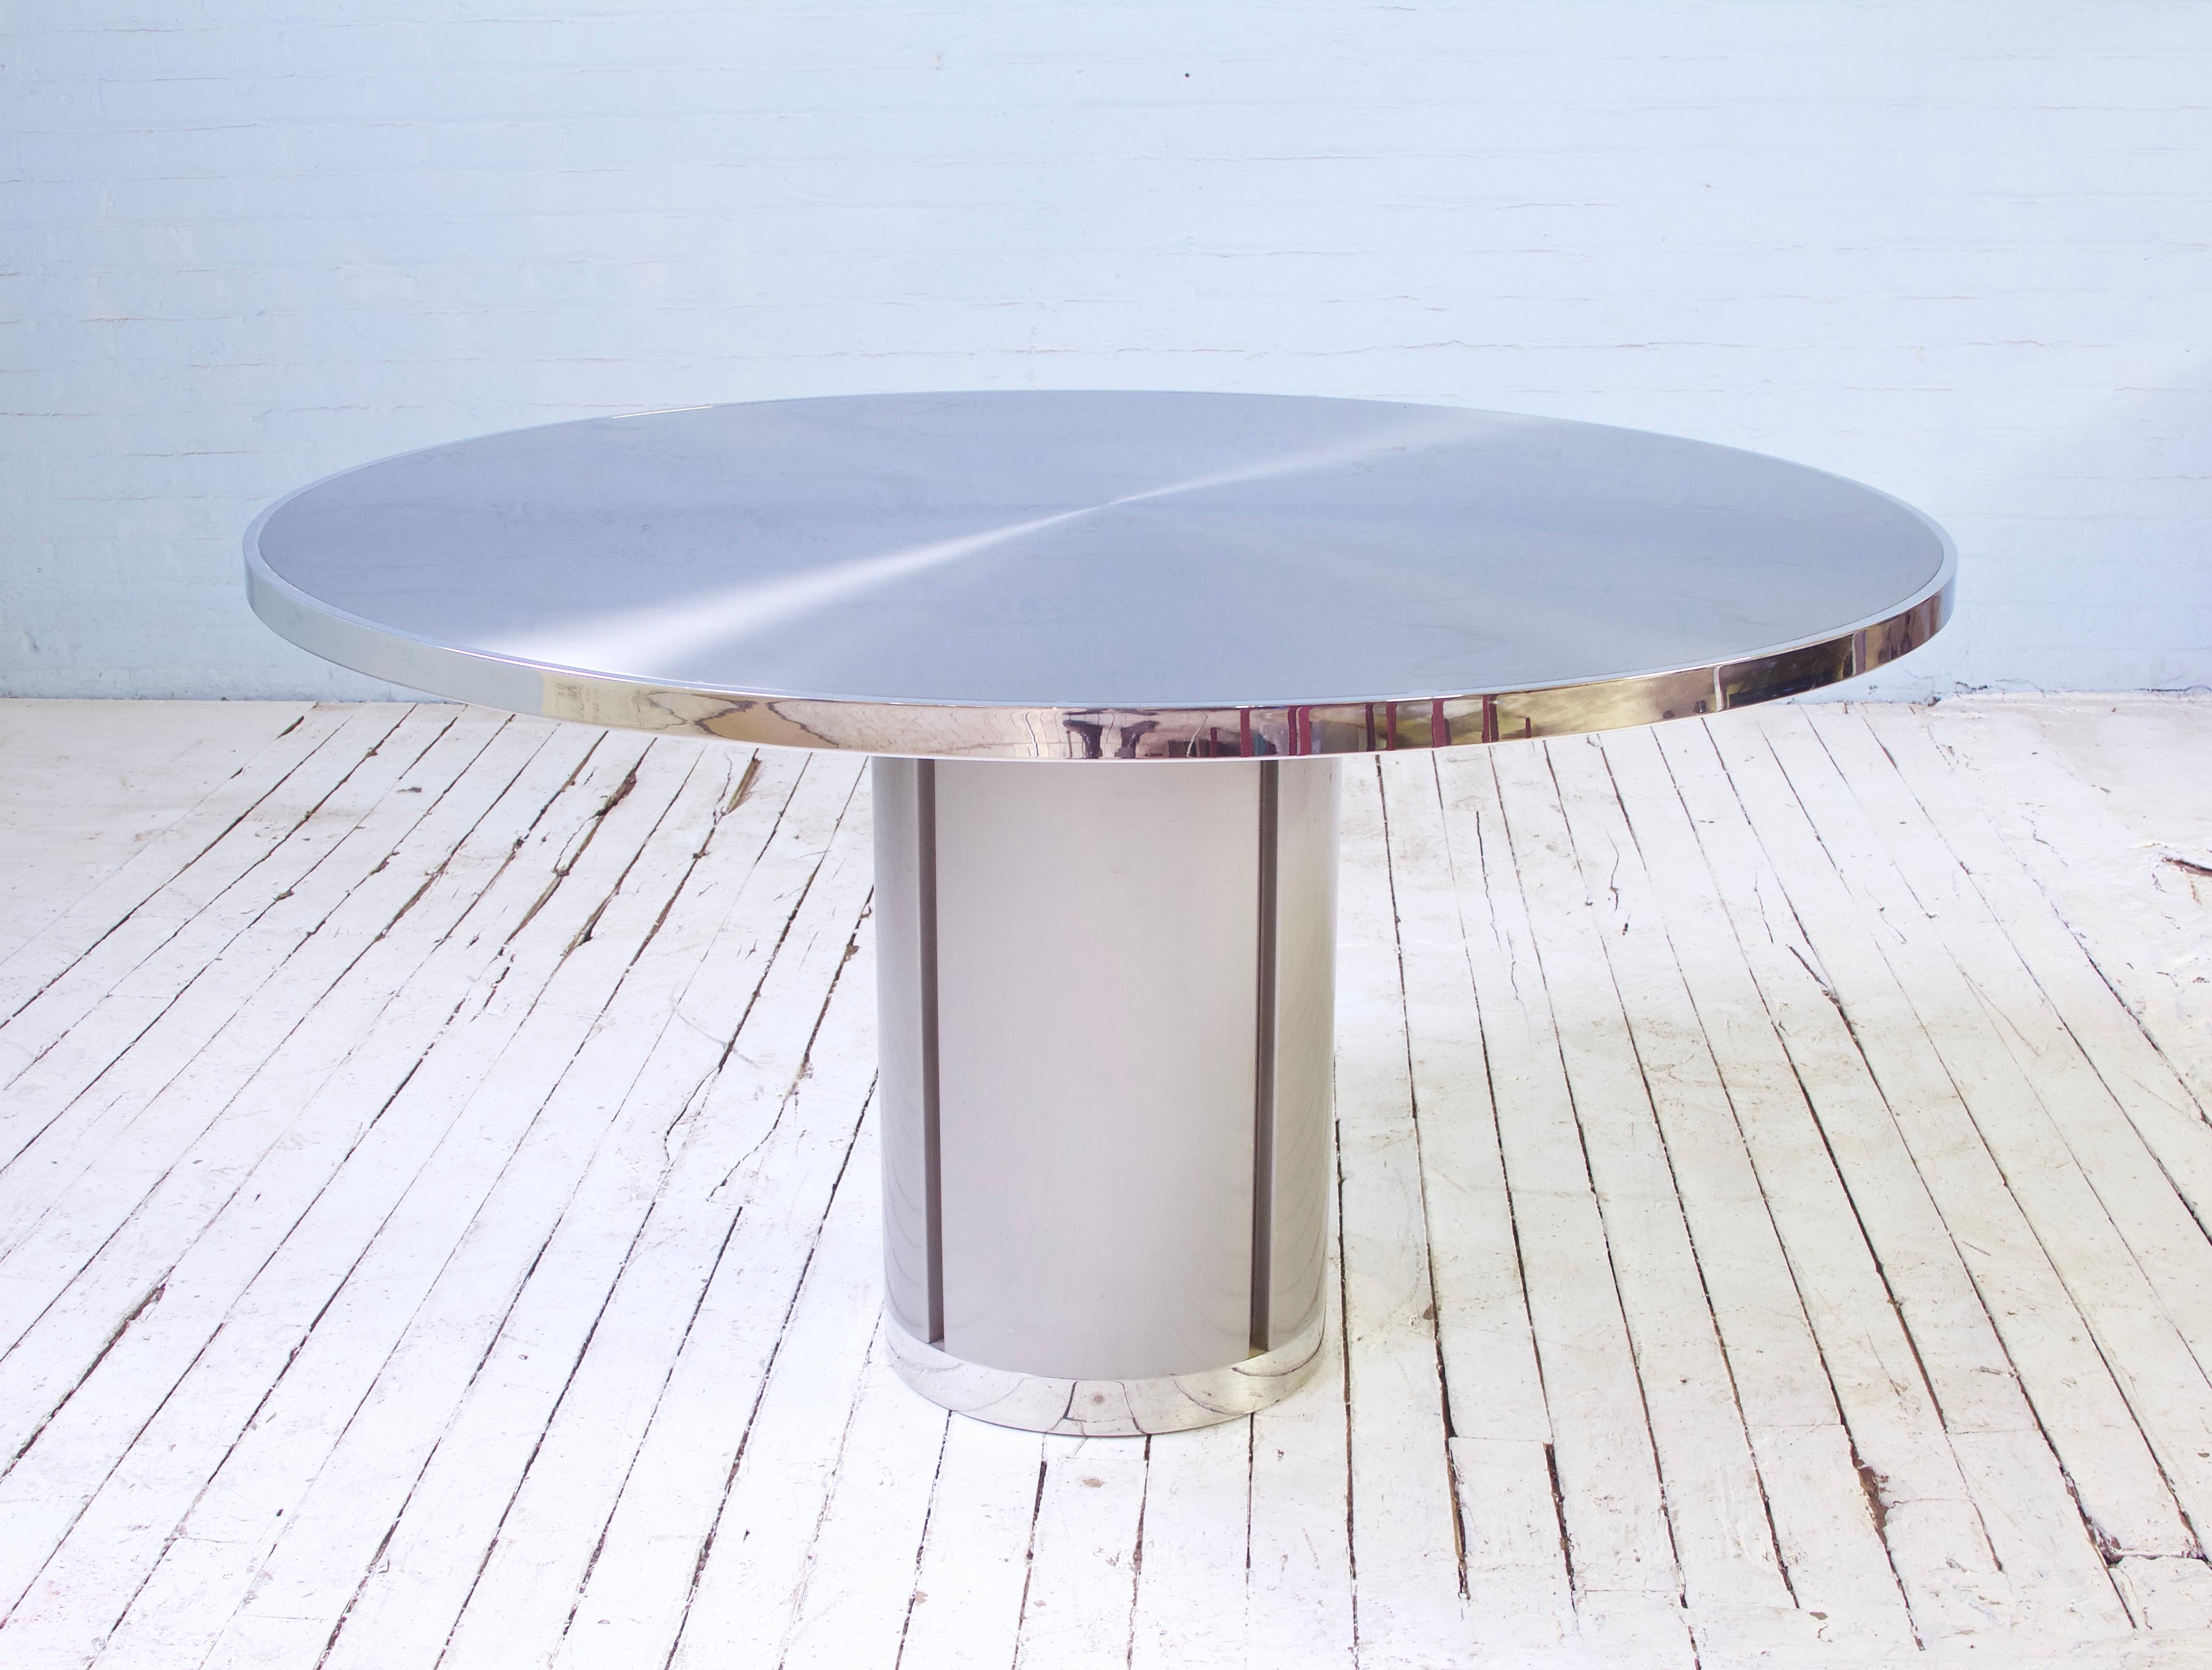 Attractive and useful pedestal-base dining table comprised of brushed aluminum, polished chrome accents, and a welded steel frame with counterweighted base. There is no bad angle on such a minimal, timeless design. Table has been photographed with a